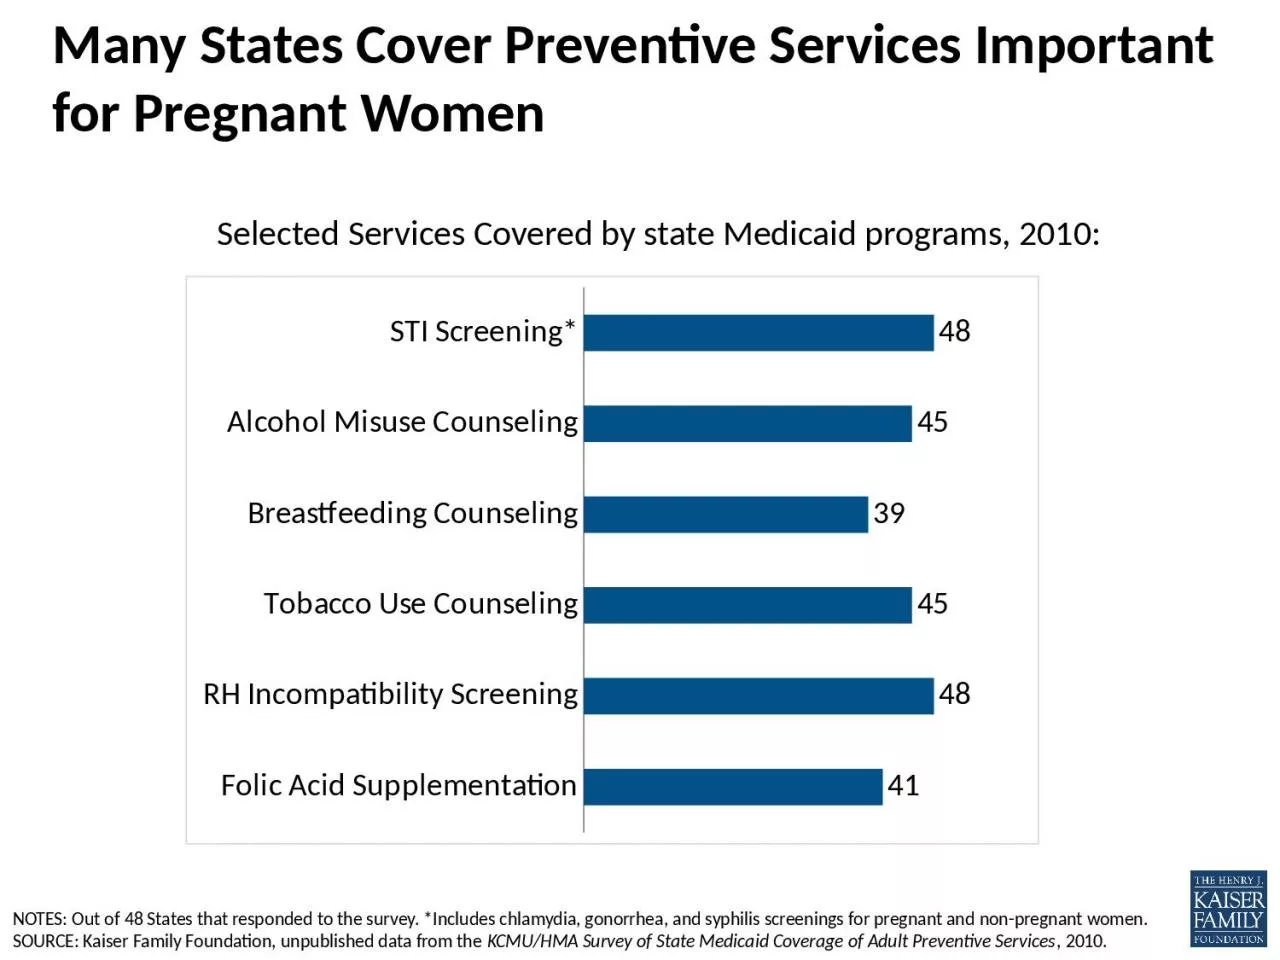 Many States Cover Preventive Services Important for Pregnant Women